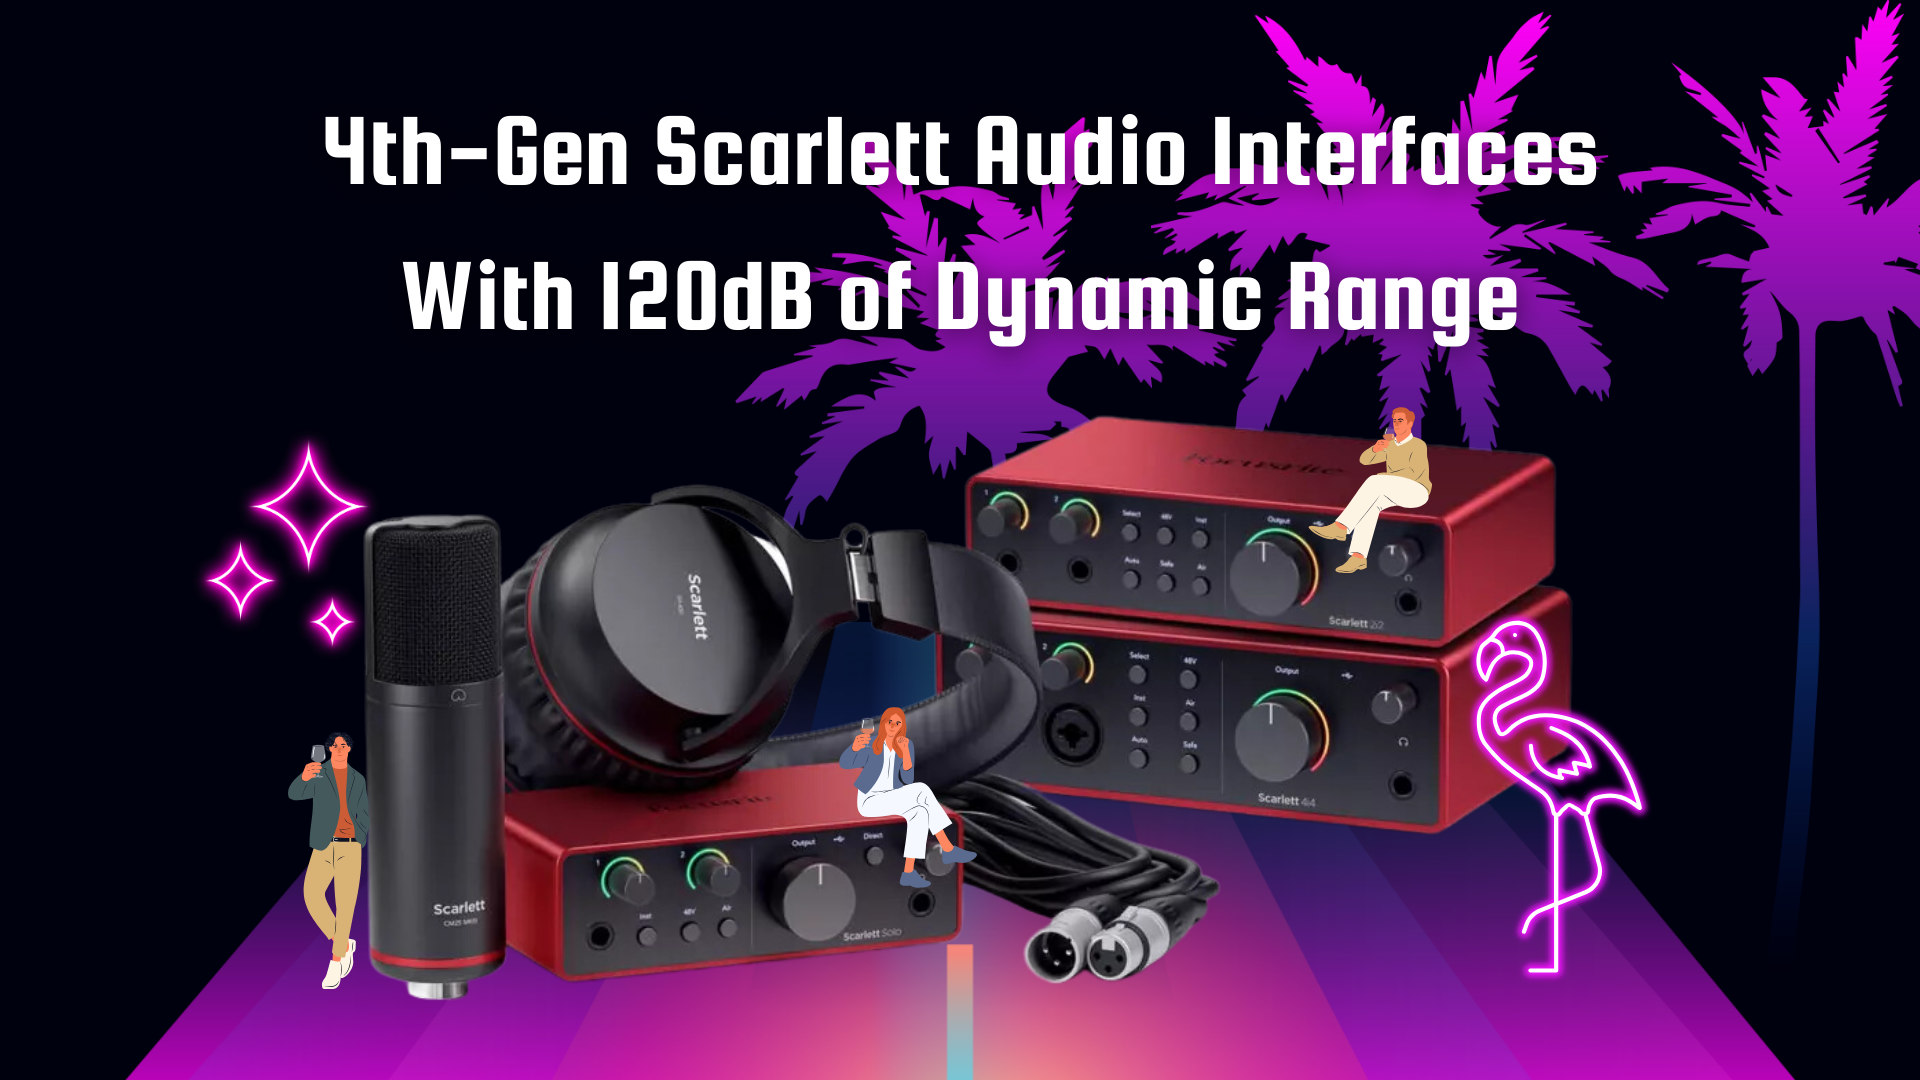 Focusrite launches 4th-gen Scarlett audio interfaces with 120dB of dynamic range